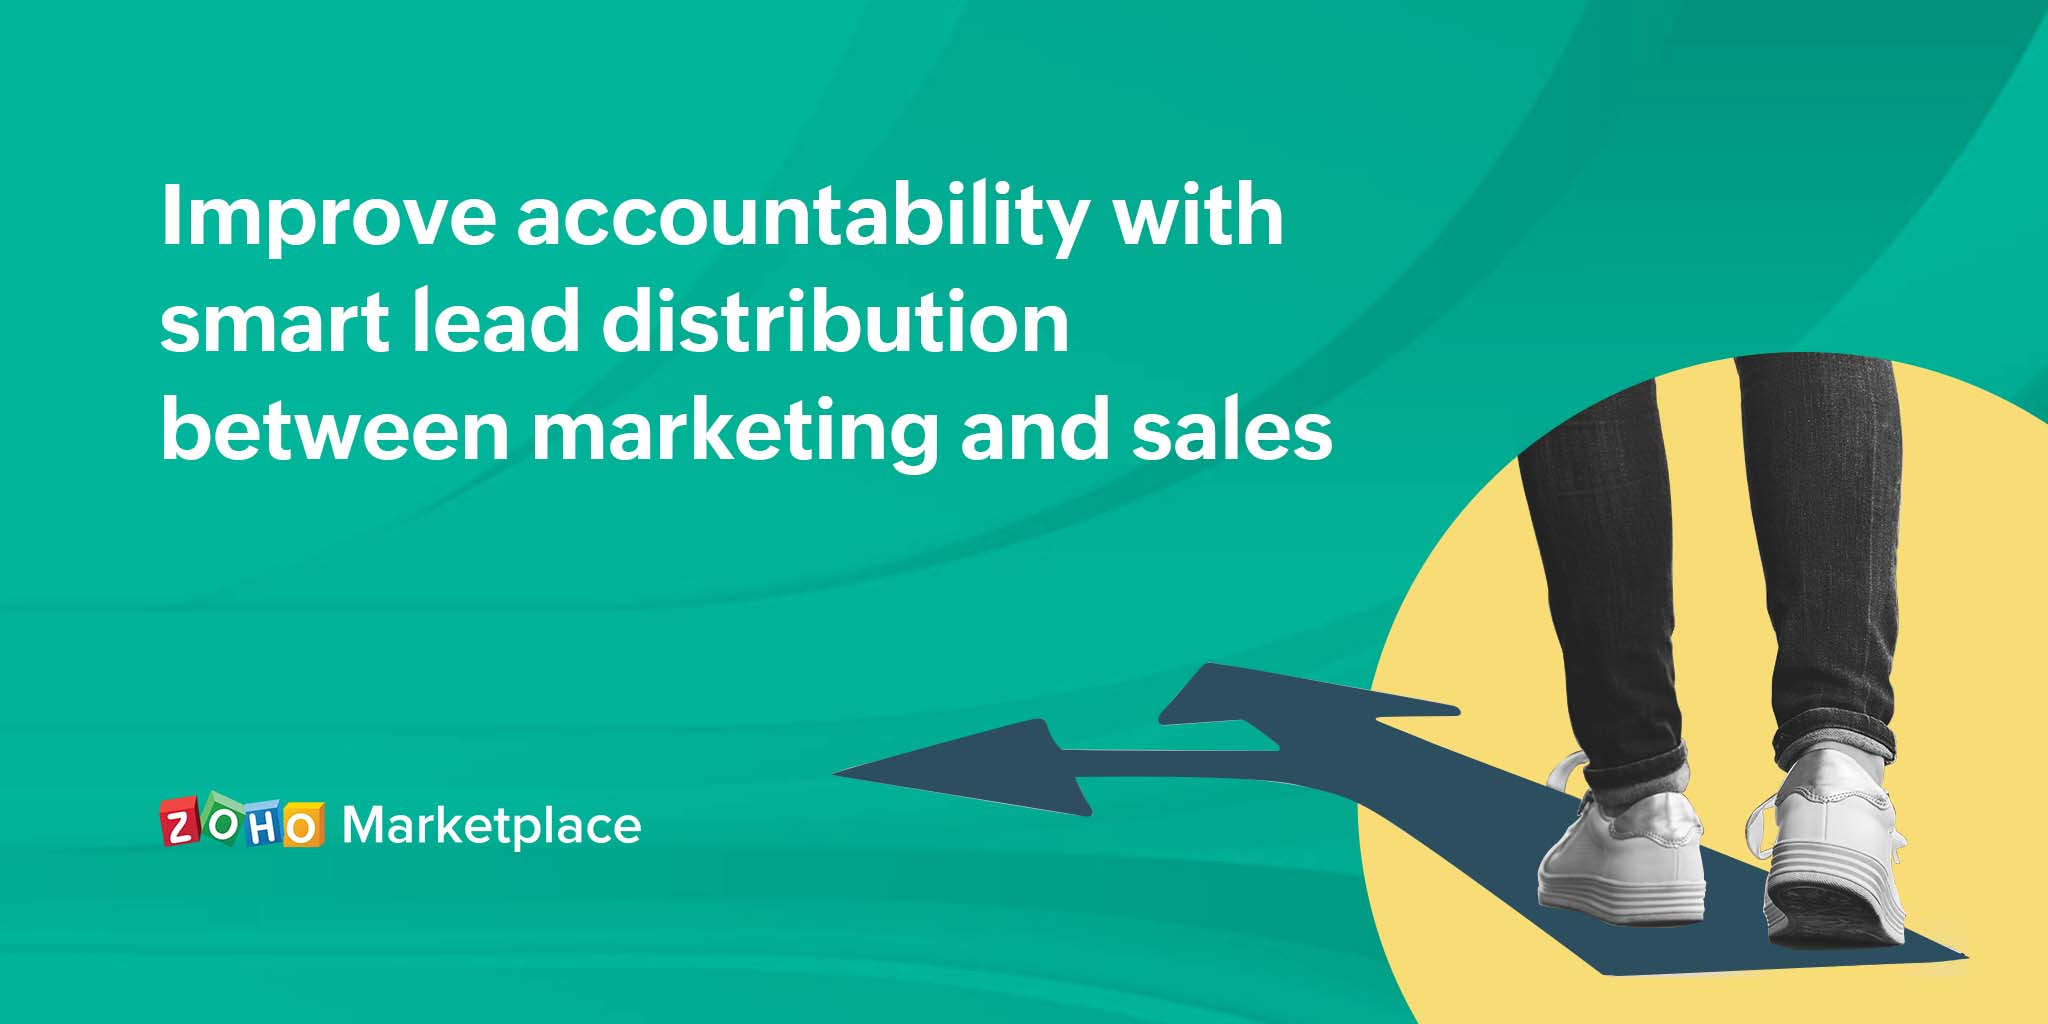 Improve accountability with smart lead distribution between marketing and sales